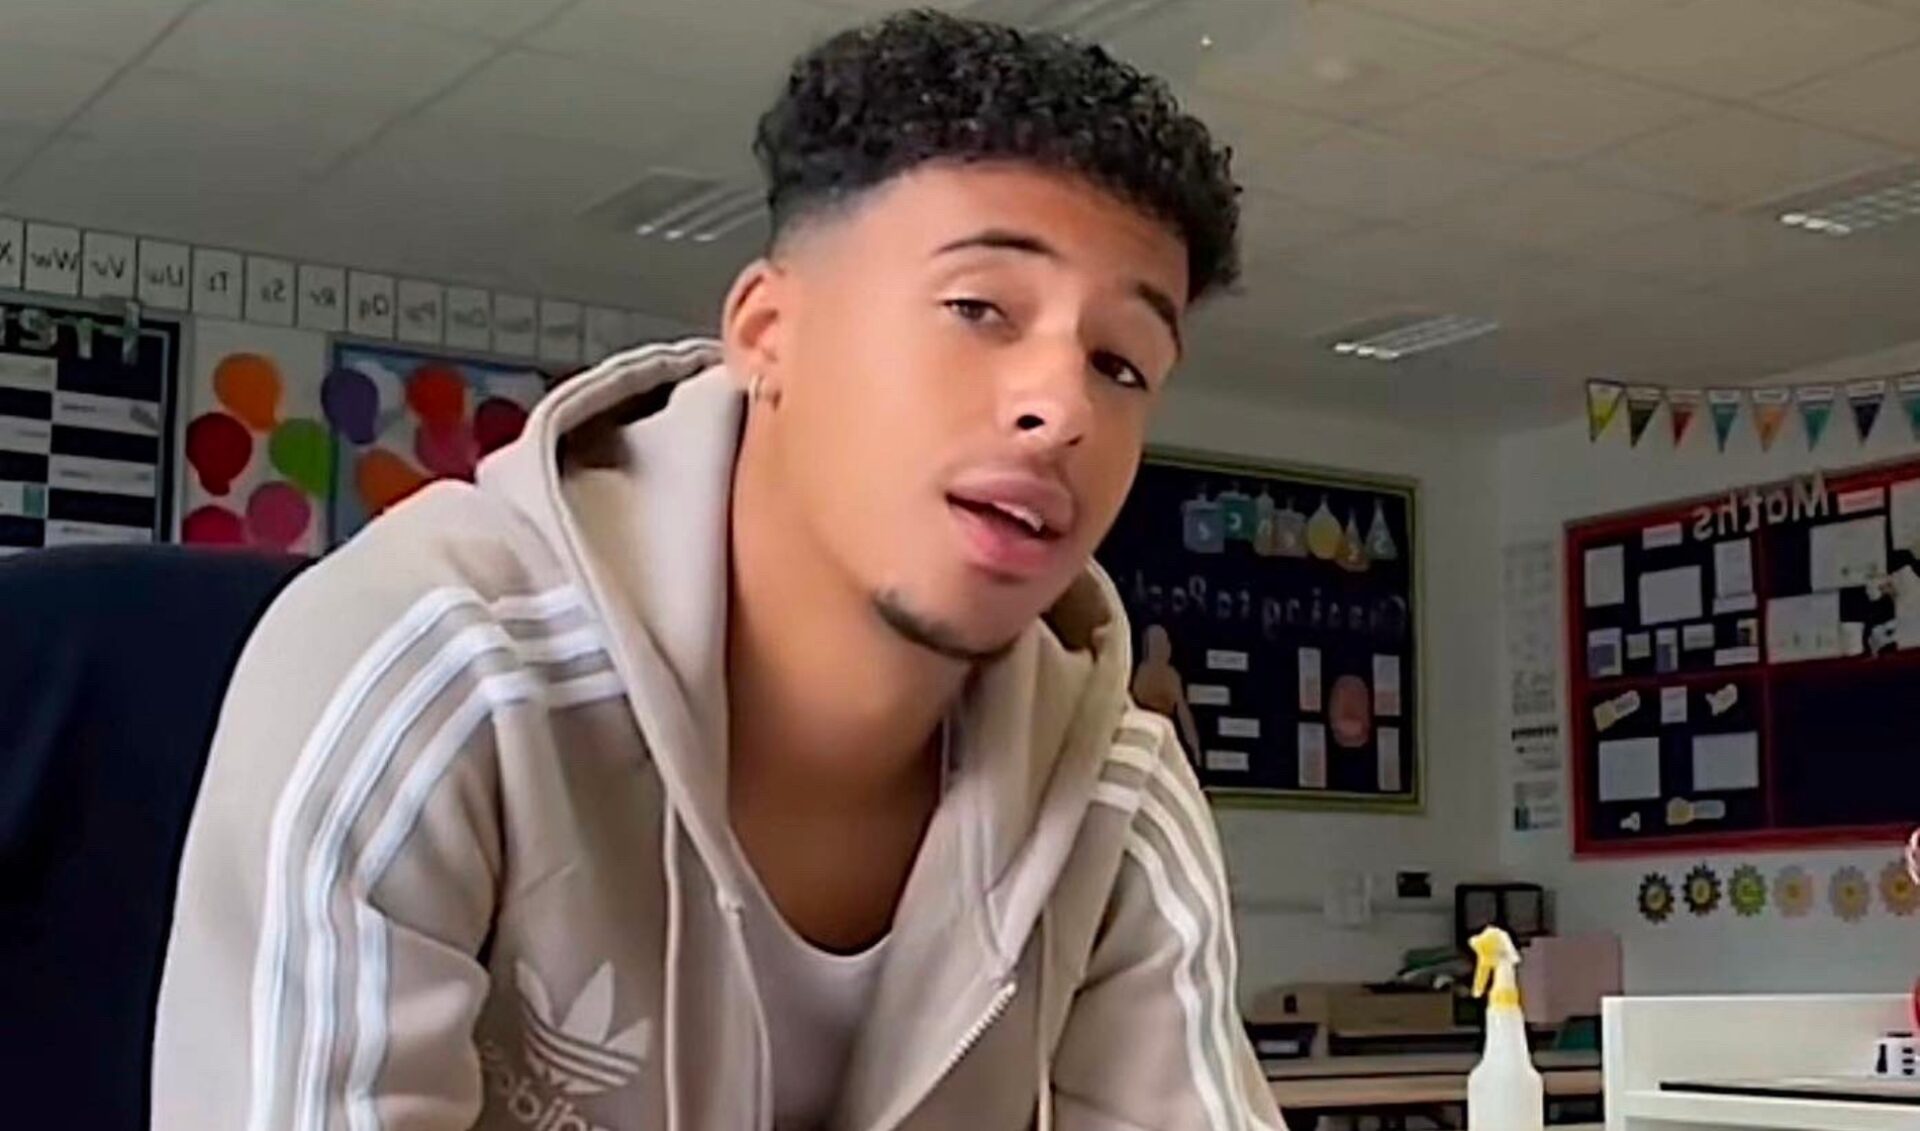 Kit Brown is a teacher who’s big on TikTok. He’s writing a book to shows kids “How To Shine” at school.